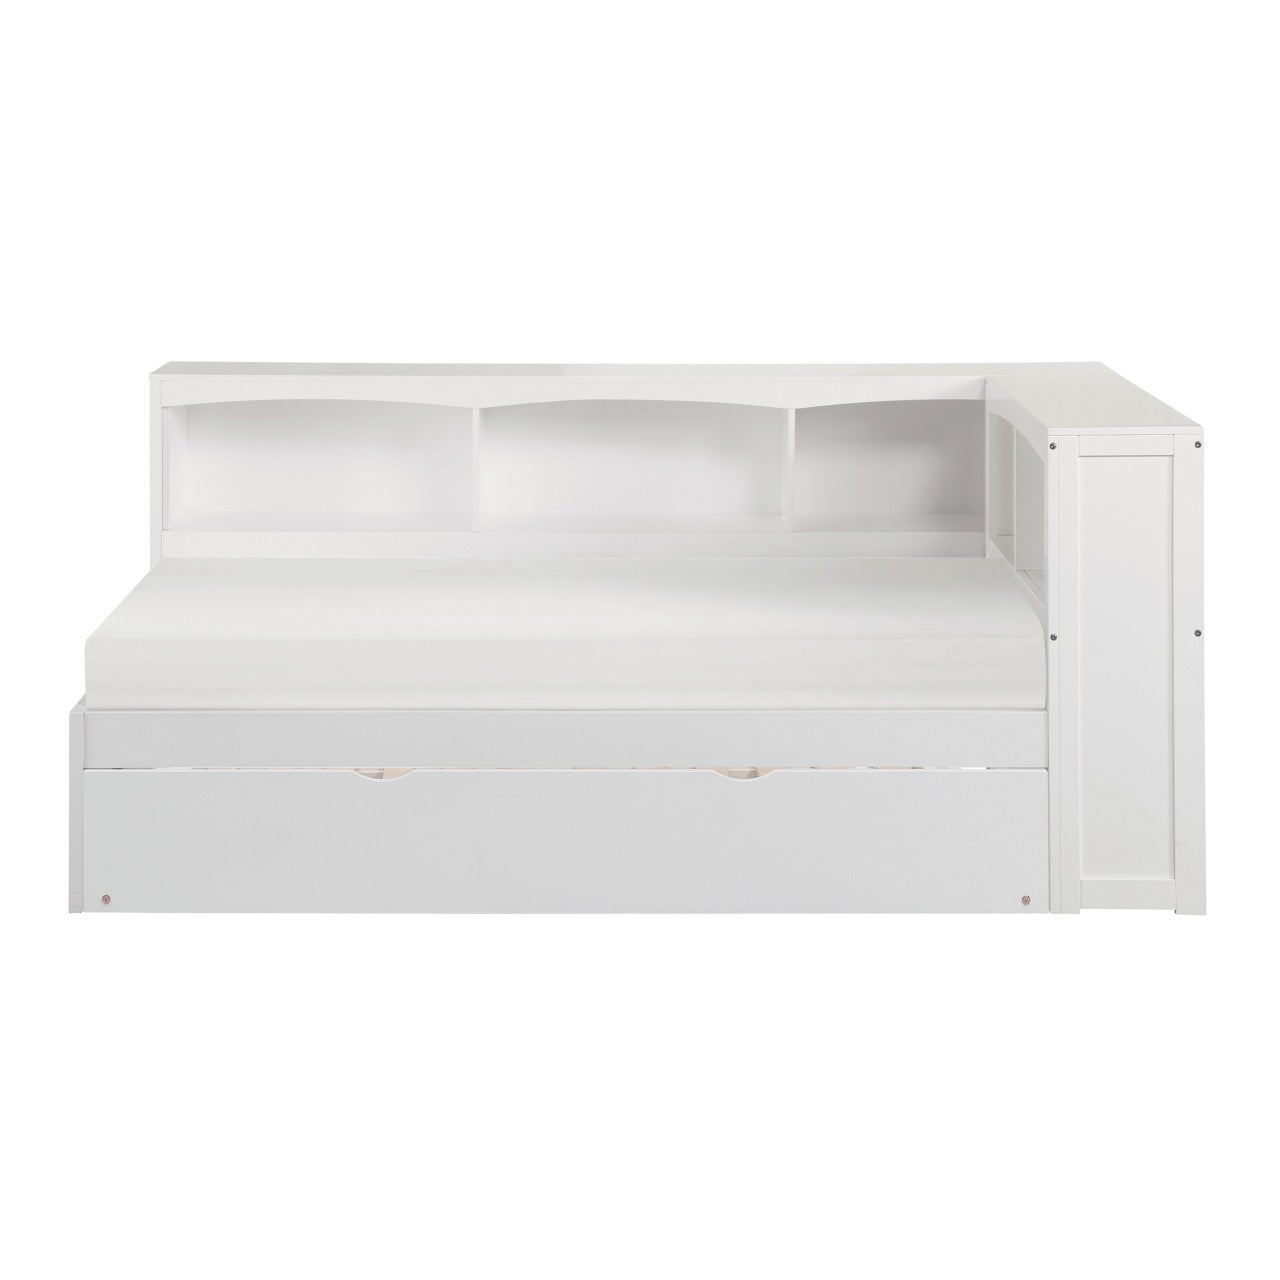 Galen White Twin Bookcase Corner Bed with Twin Trundle - SET | B2053BCW-1 | B2053BCW-2 | B2053BCW-BC | B2053W-R - Bien Home Furniture &amp; Electronics